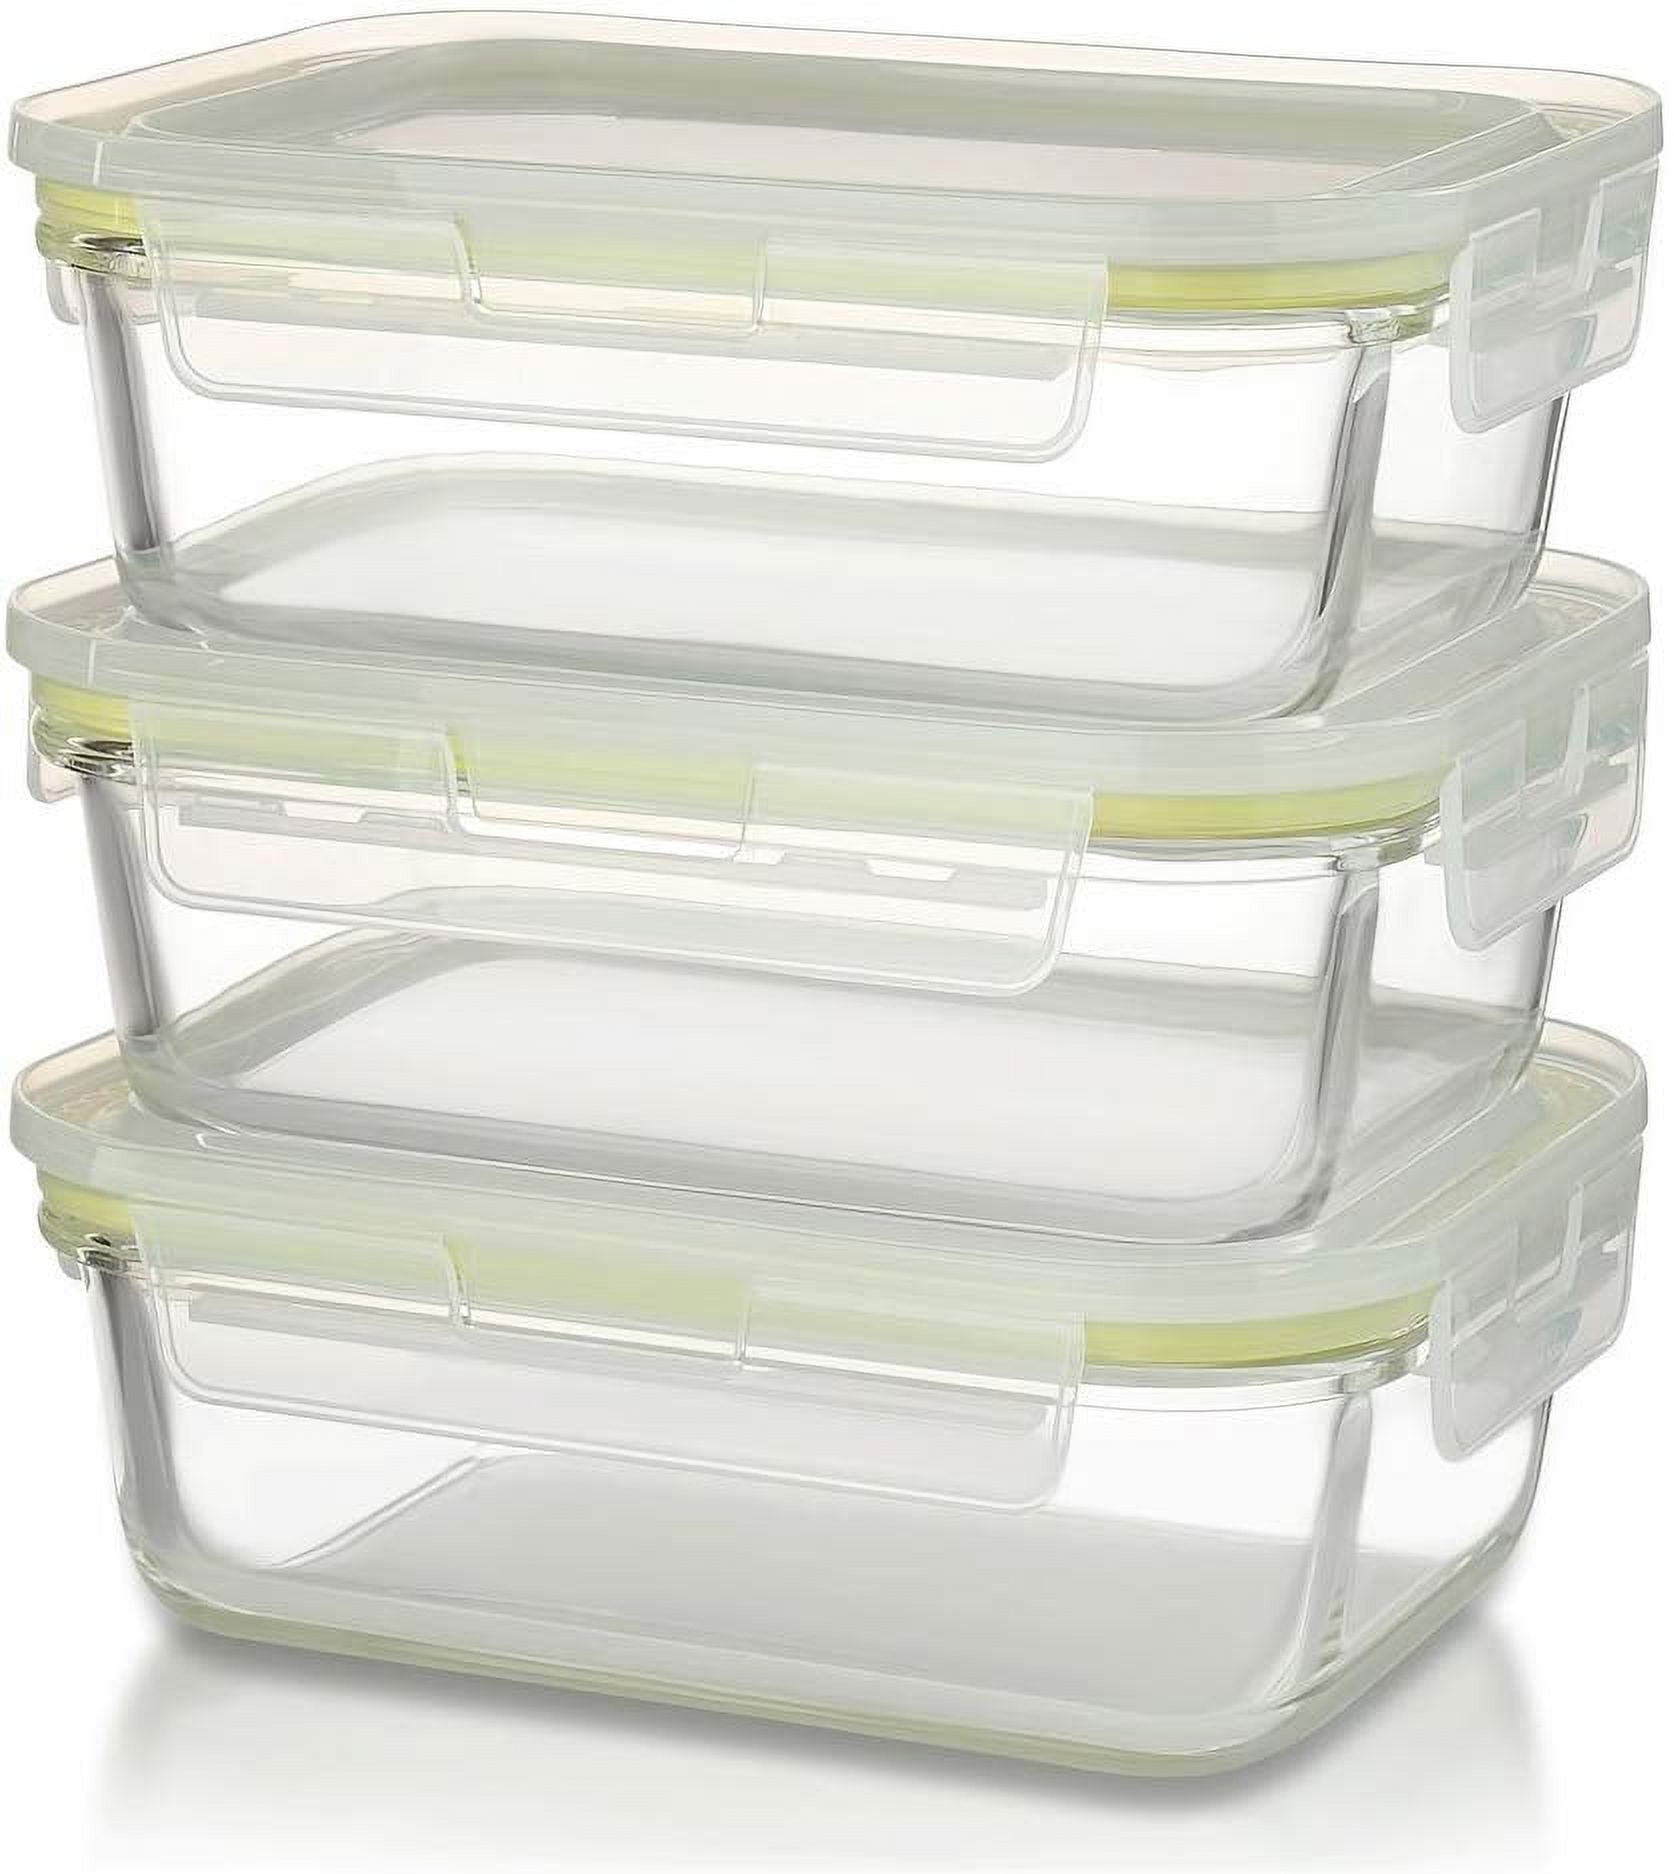 Komax LOOK square sealable glass food storage container 650 ml (22 fl.oz.)